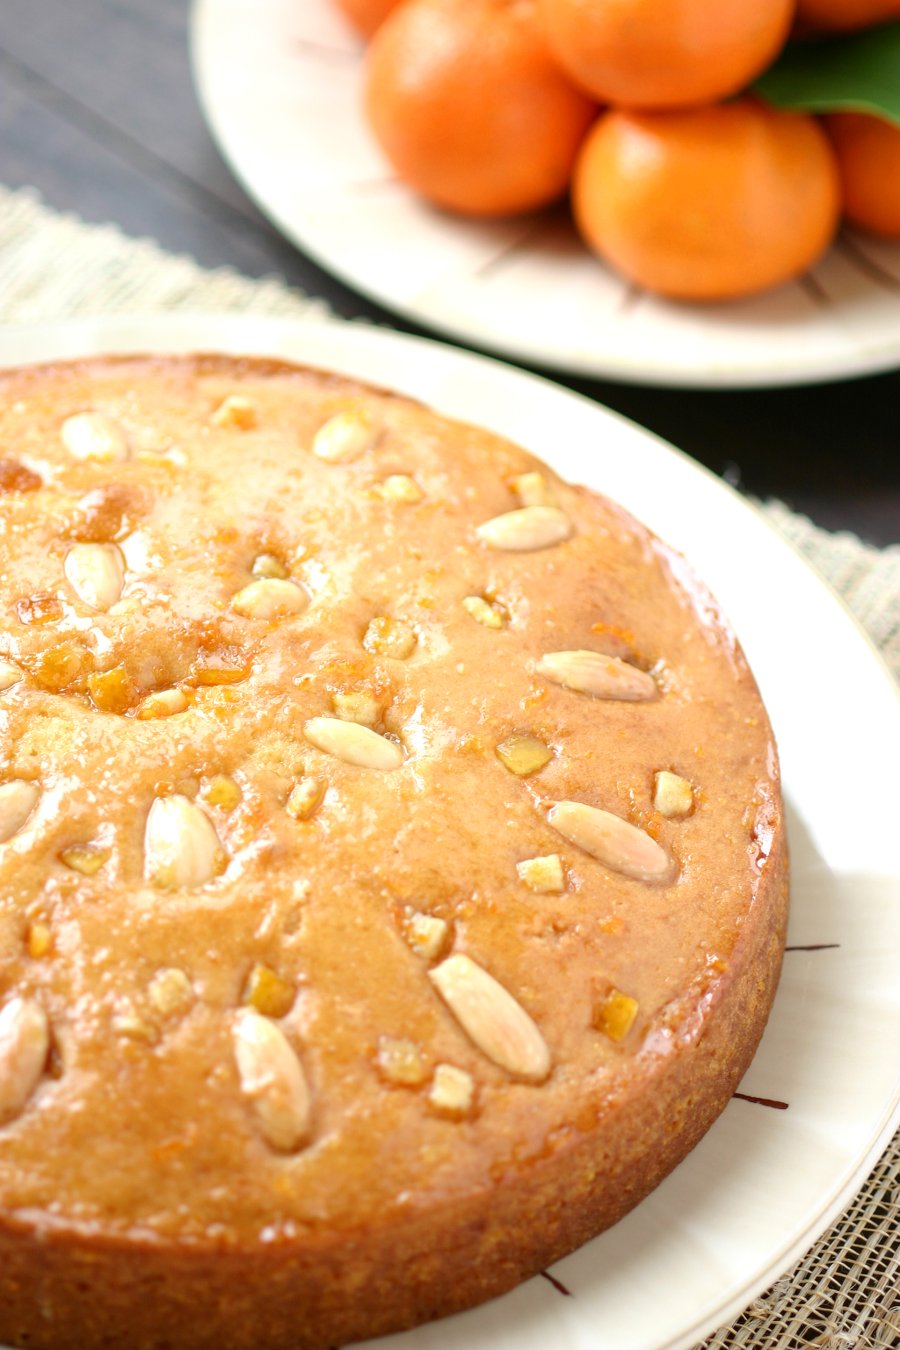 Sweet oranges and fruity olive oil lend a fragrant aroma and a moist crumb to this Italian-inspired recipe for Orange Almond Olive Oil cake.